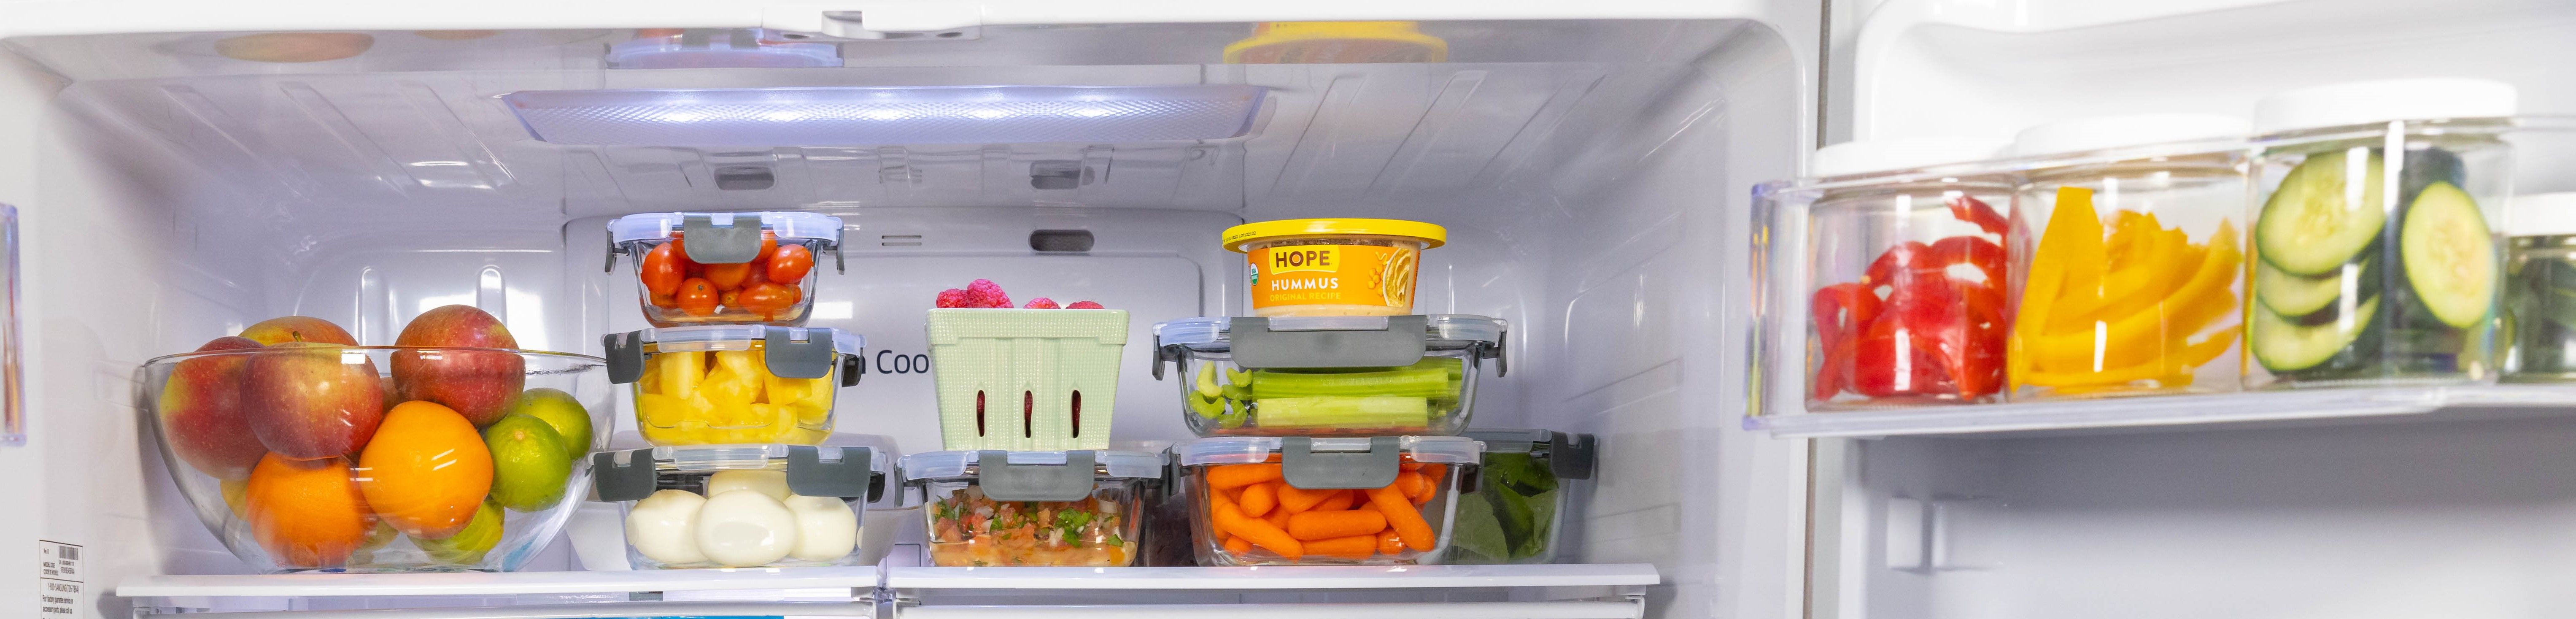 How to Organize your Refrigerator for Healthy Eating – Organized